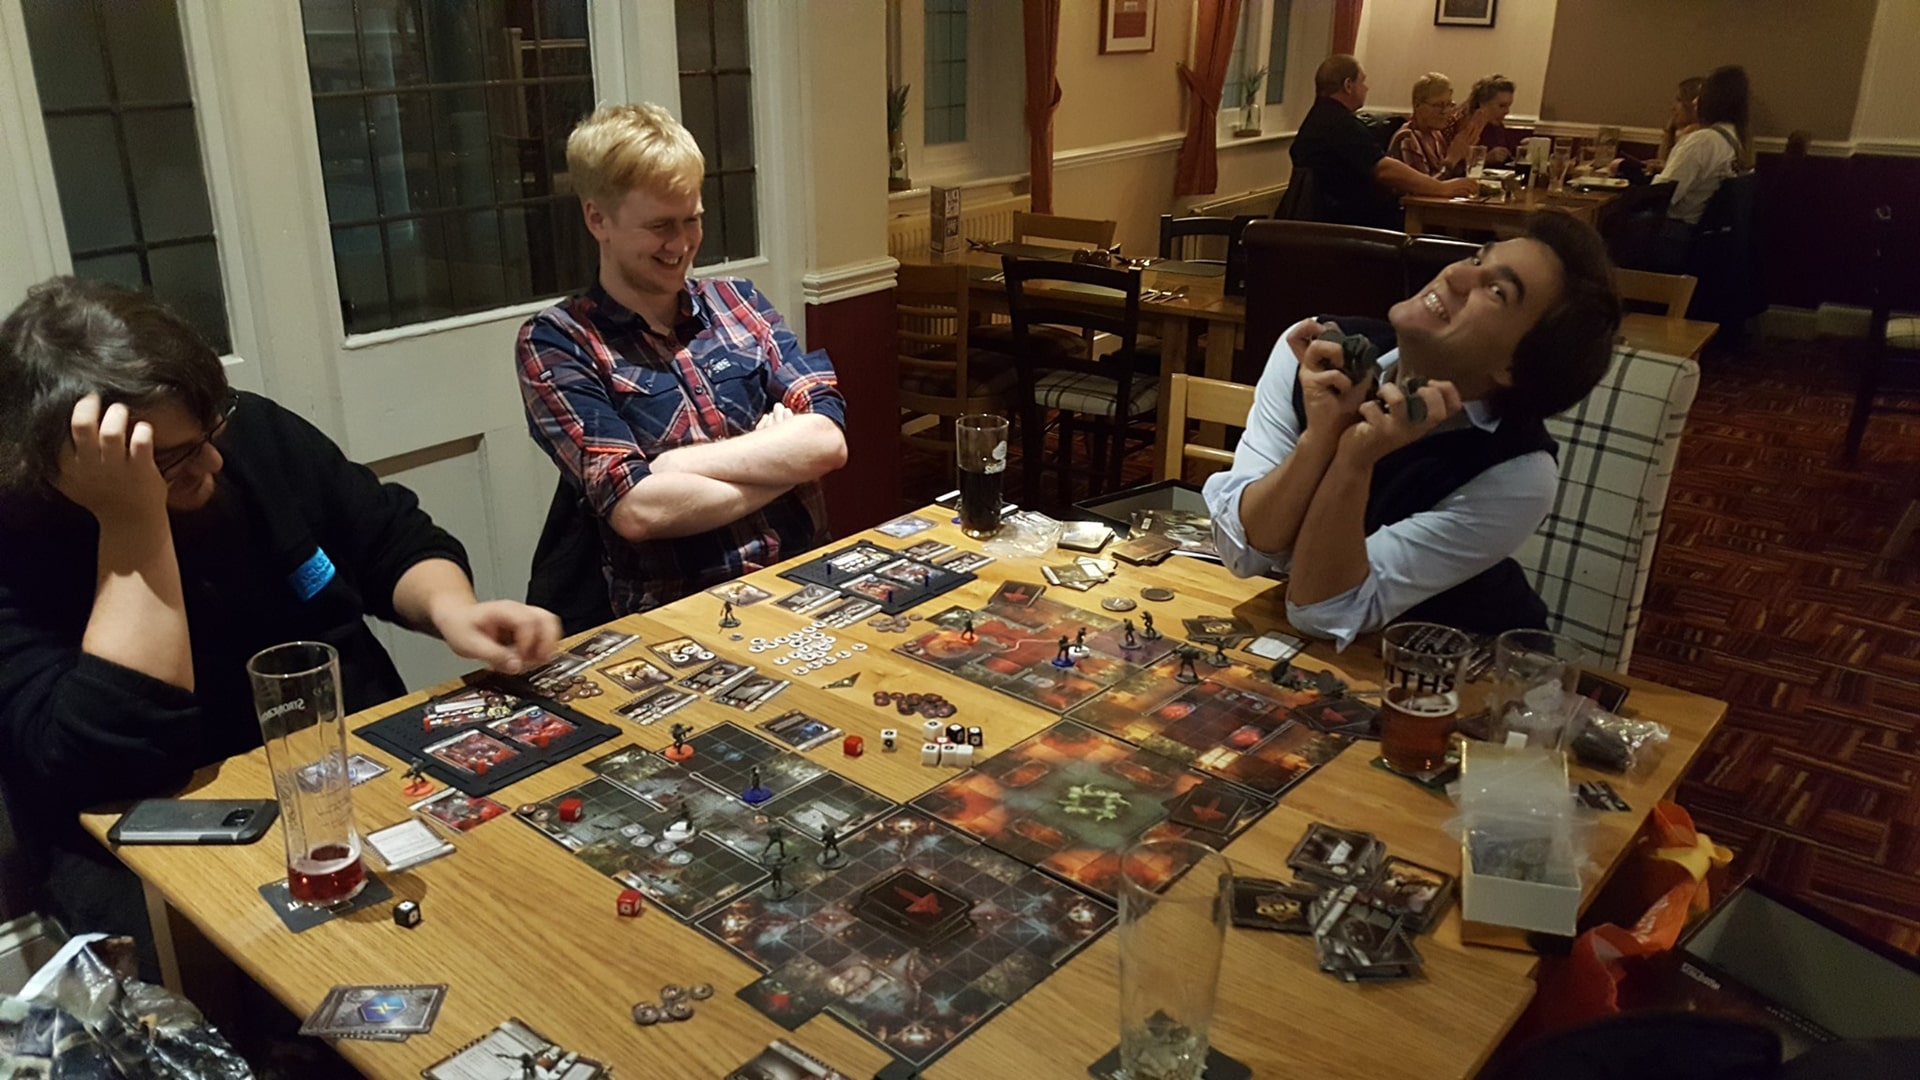 A lively scene from a tabletop gaming club, showing enthusiasts engaged in various board games, reflecting the social and community aspect of tabletop gaming.